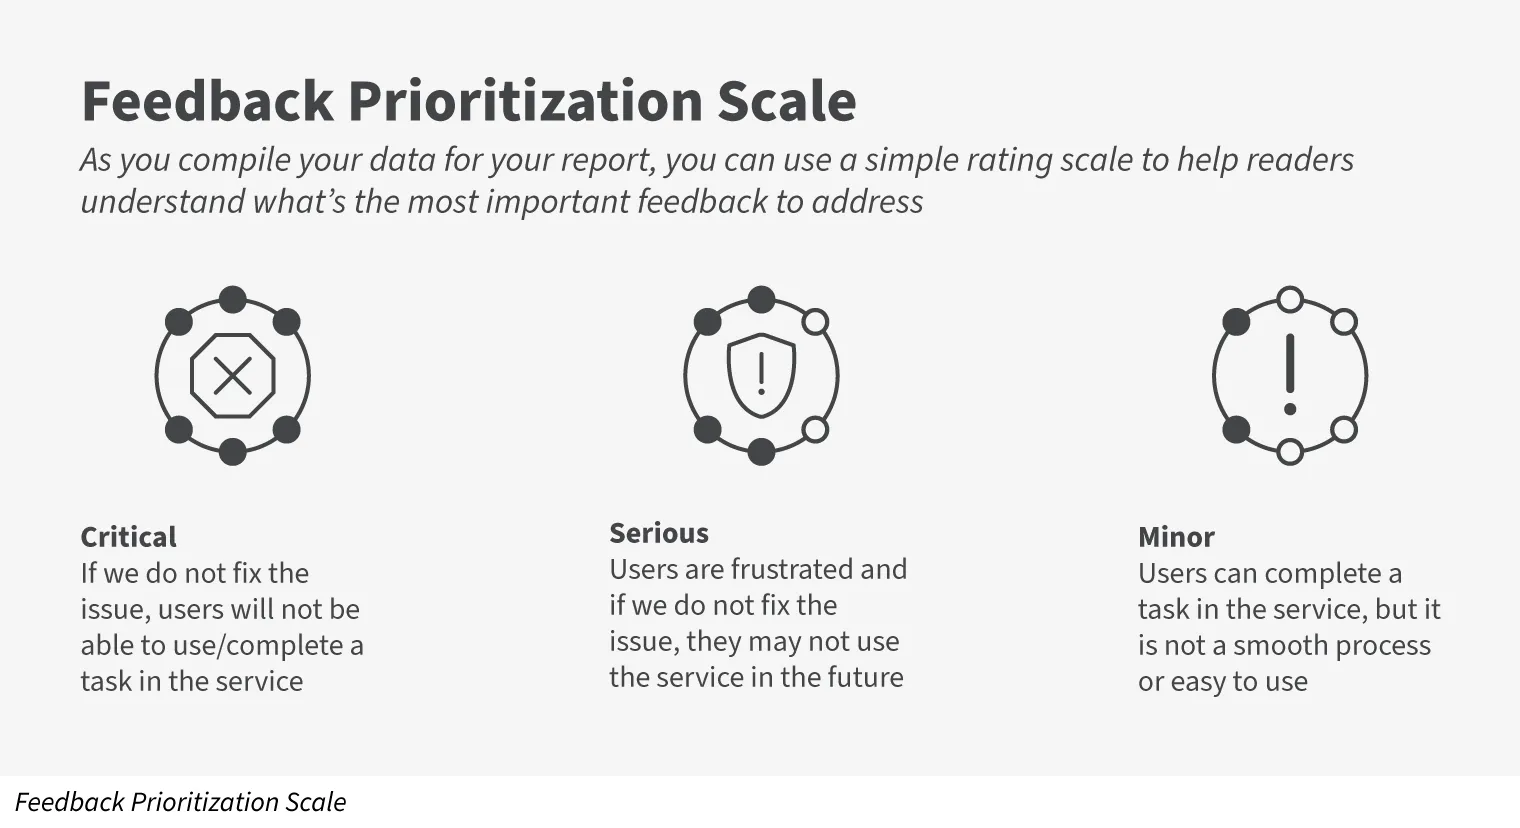 Feedback Prioritization Scale (graphic). As you compile data for the report, you can use a simple rating scale to help readers understand what’s the most important feedback to address. Priorities: Critical (must fix or users cannot use/complete a task), Serious (frustrates users and they may not use the service in the future), and Minor (not a smooth process but task can be completed).